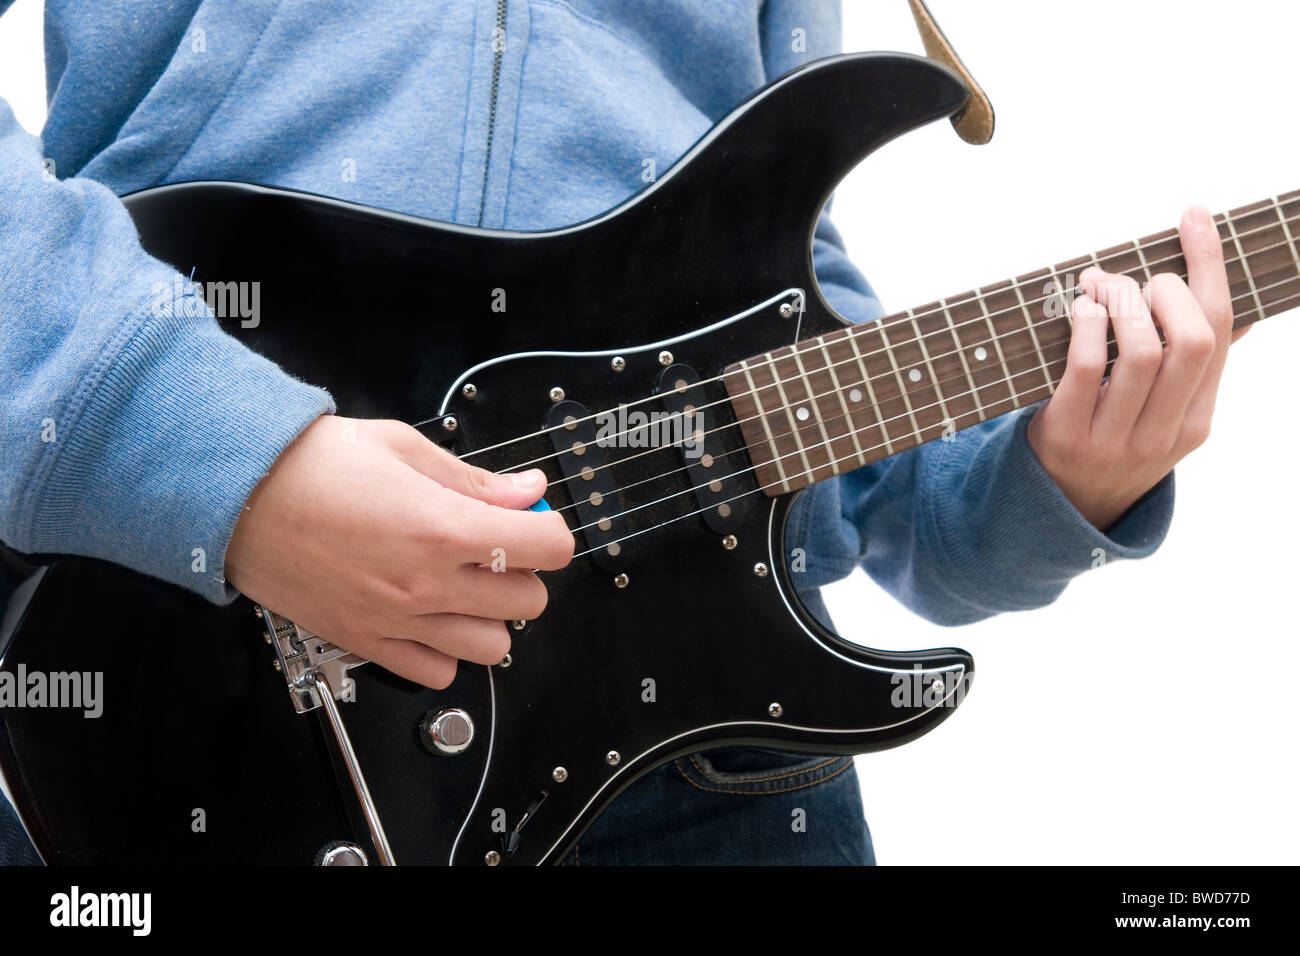 Teenager playing electric guitar on white background Stock Photo